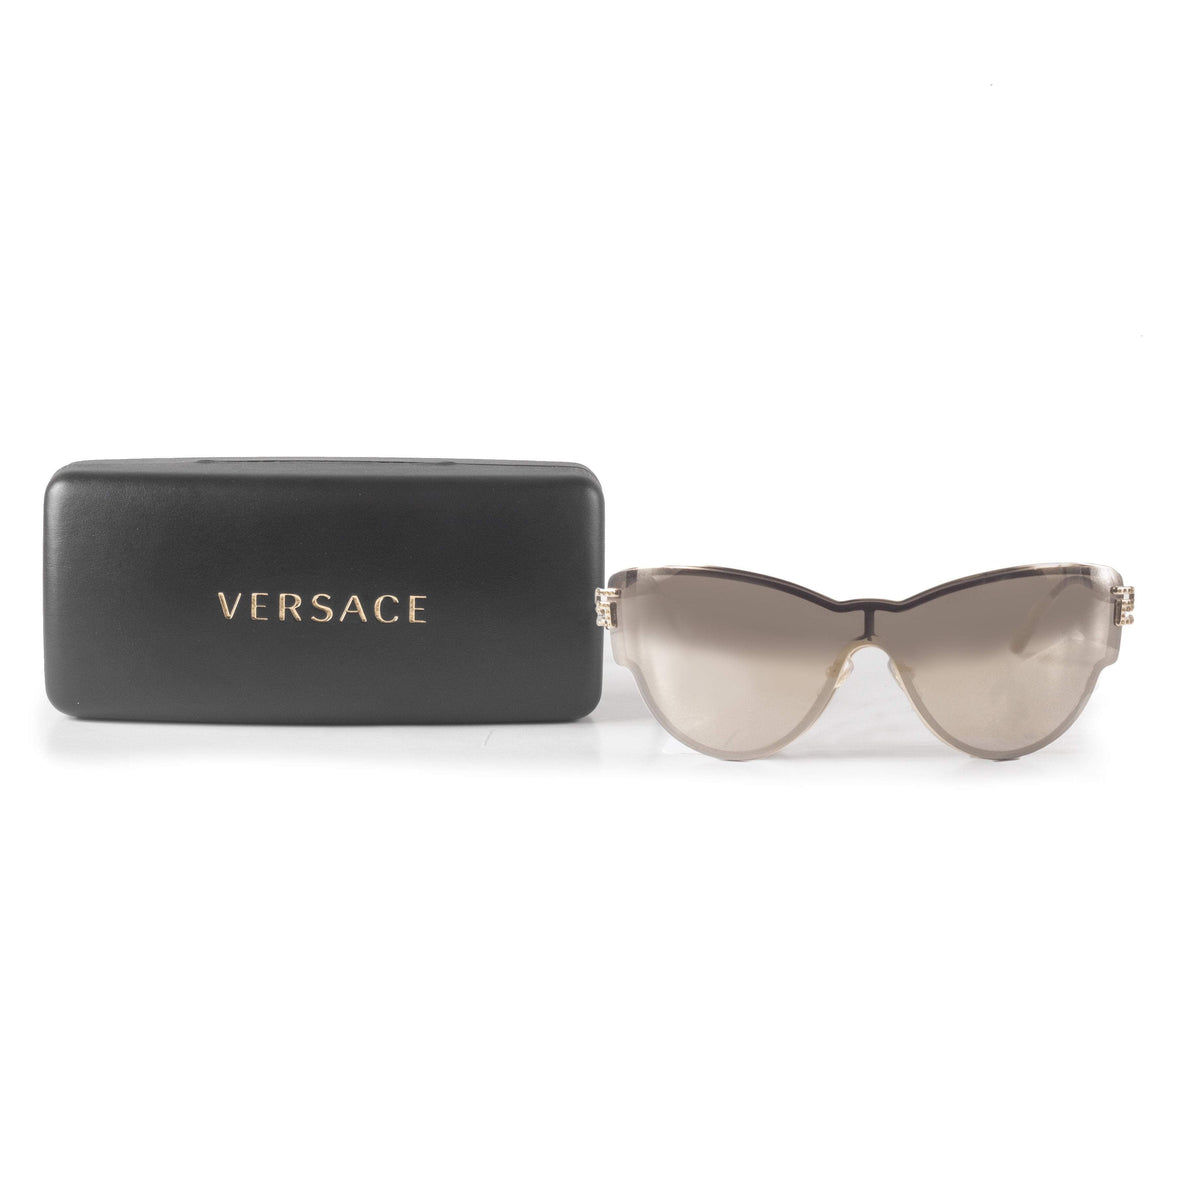 Pale Gold Sunglasses by Versace